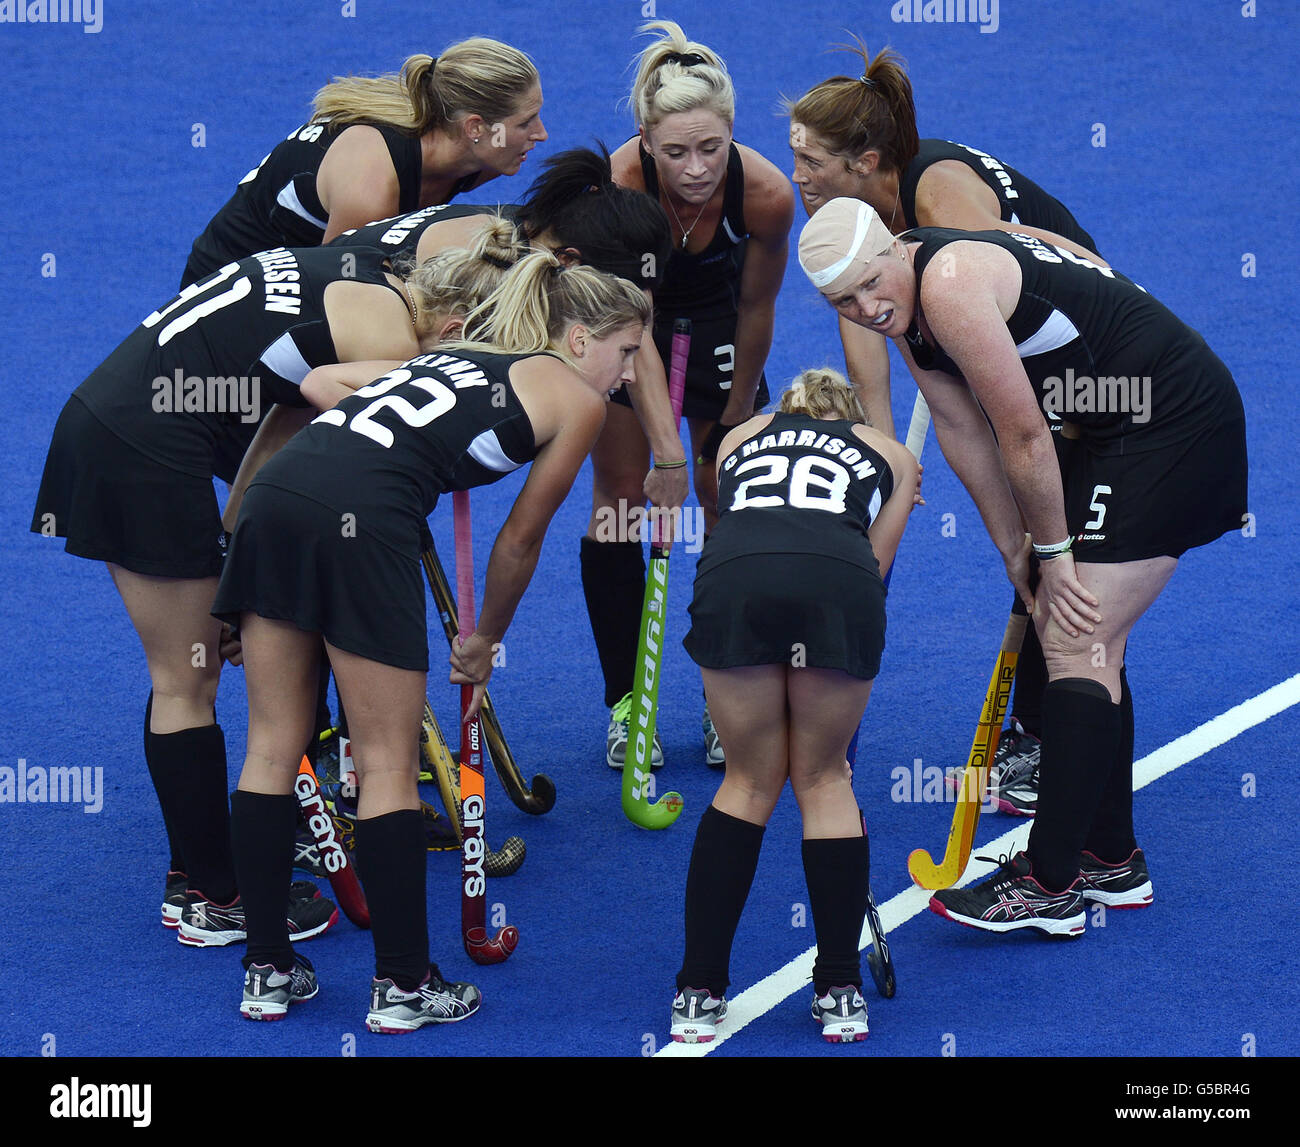 New Zealand's Katie Glynn (right) returns to the field with her head bandaged, during the Women's Semi-final at the Riverbank Arena during Day 12 of the London 2012 Olympics. Stock Photo